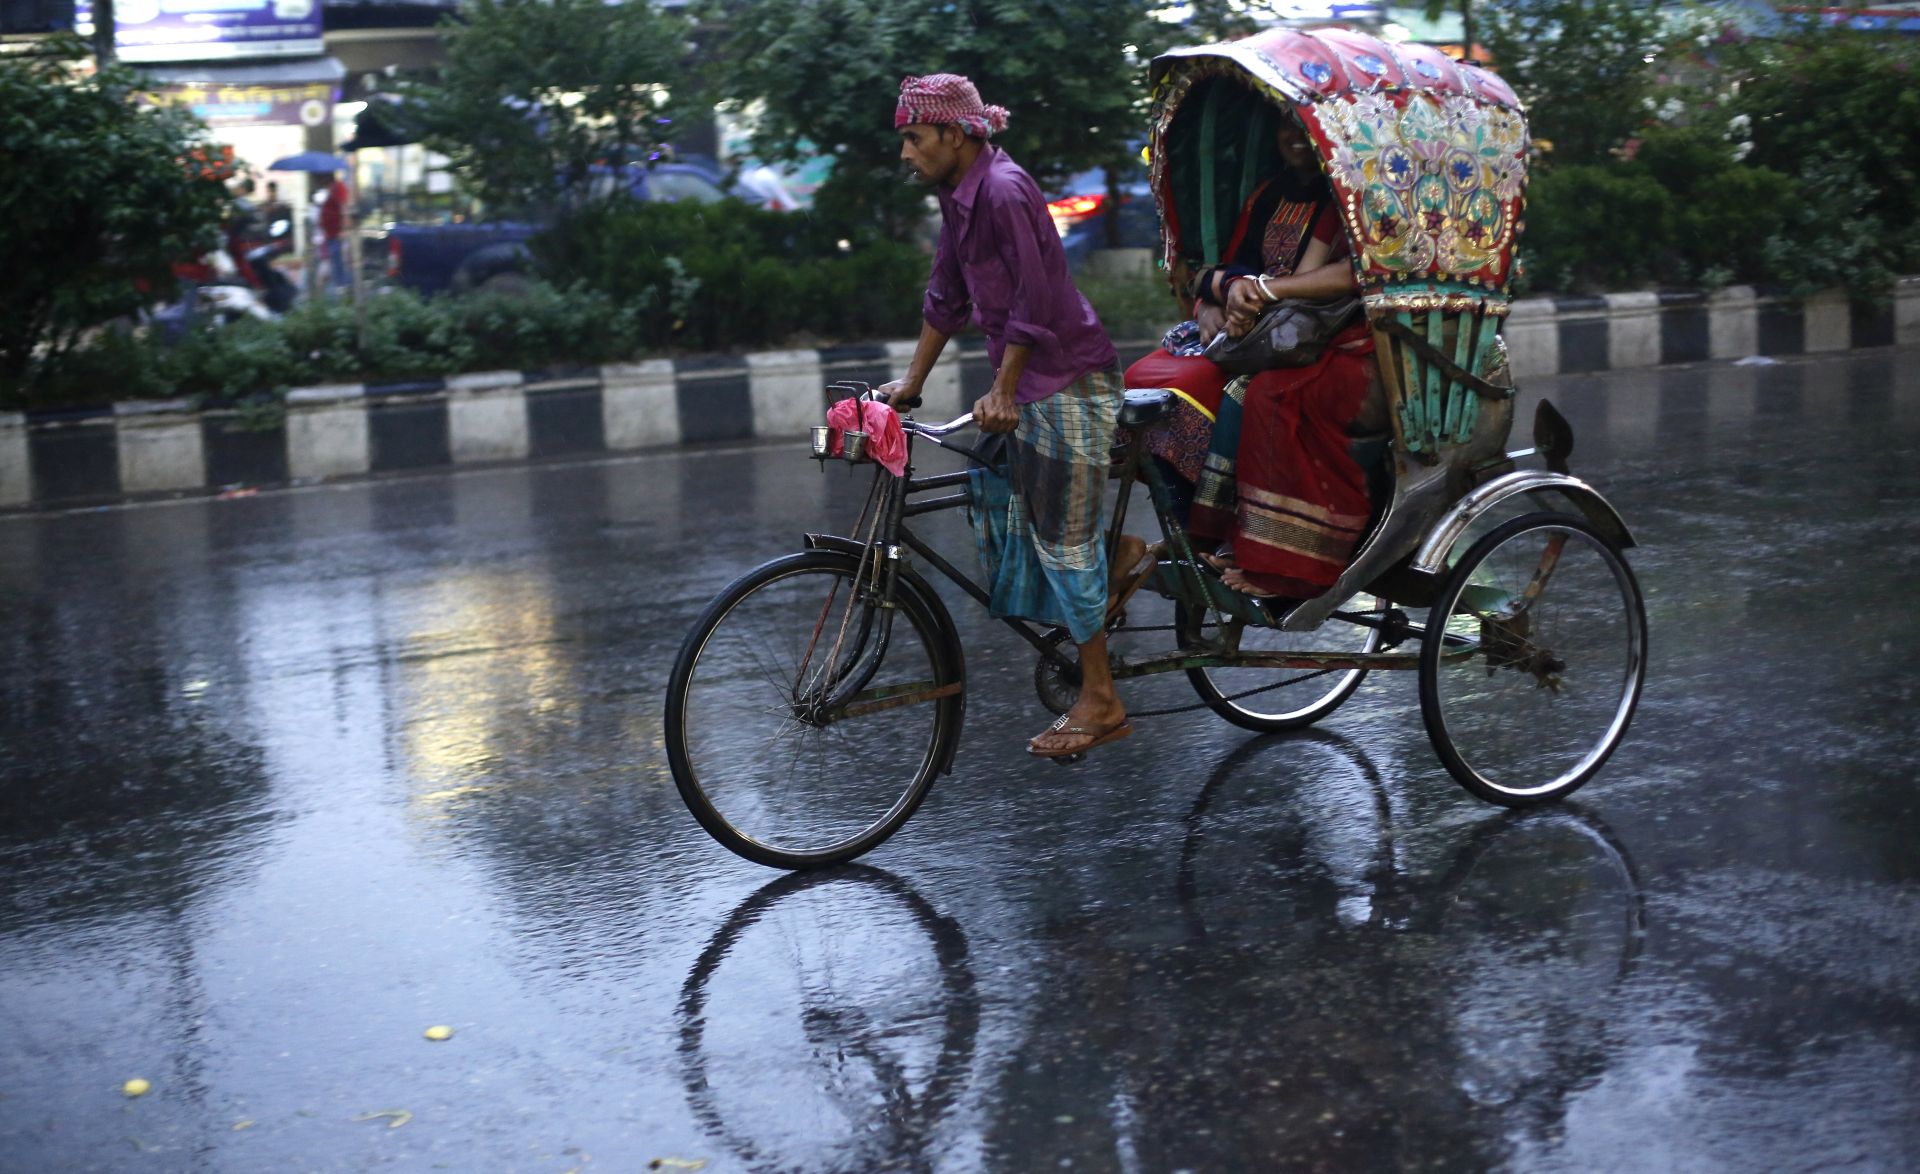 epa05997417 A rickshaw puller carries a passenger during rainy weather in Dhaka, Bangladesh, 29 May 2017. Cyclonic storm 'Mora' heads towards Bangladesh's coastal areas including Cox'sbazar, Chittagong, Barisal, Pyra, and Mongla, according to the Bangladesh Meteorological Department. The cyclone is going to cross Chittagong areas on 30 May.  EPA/ABIR ABDULLAH